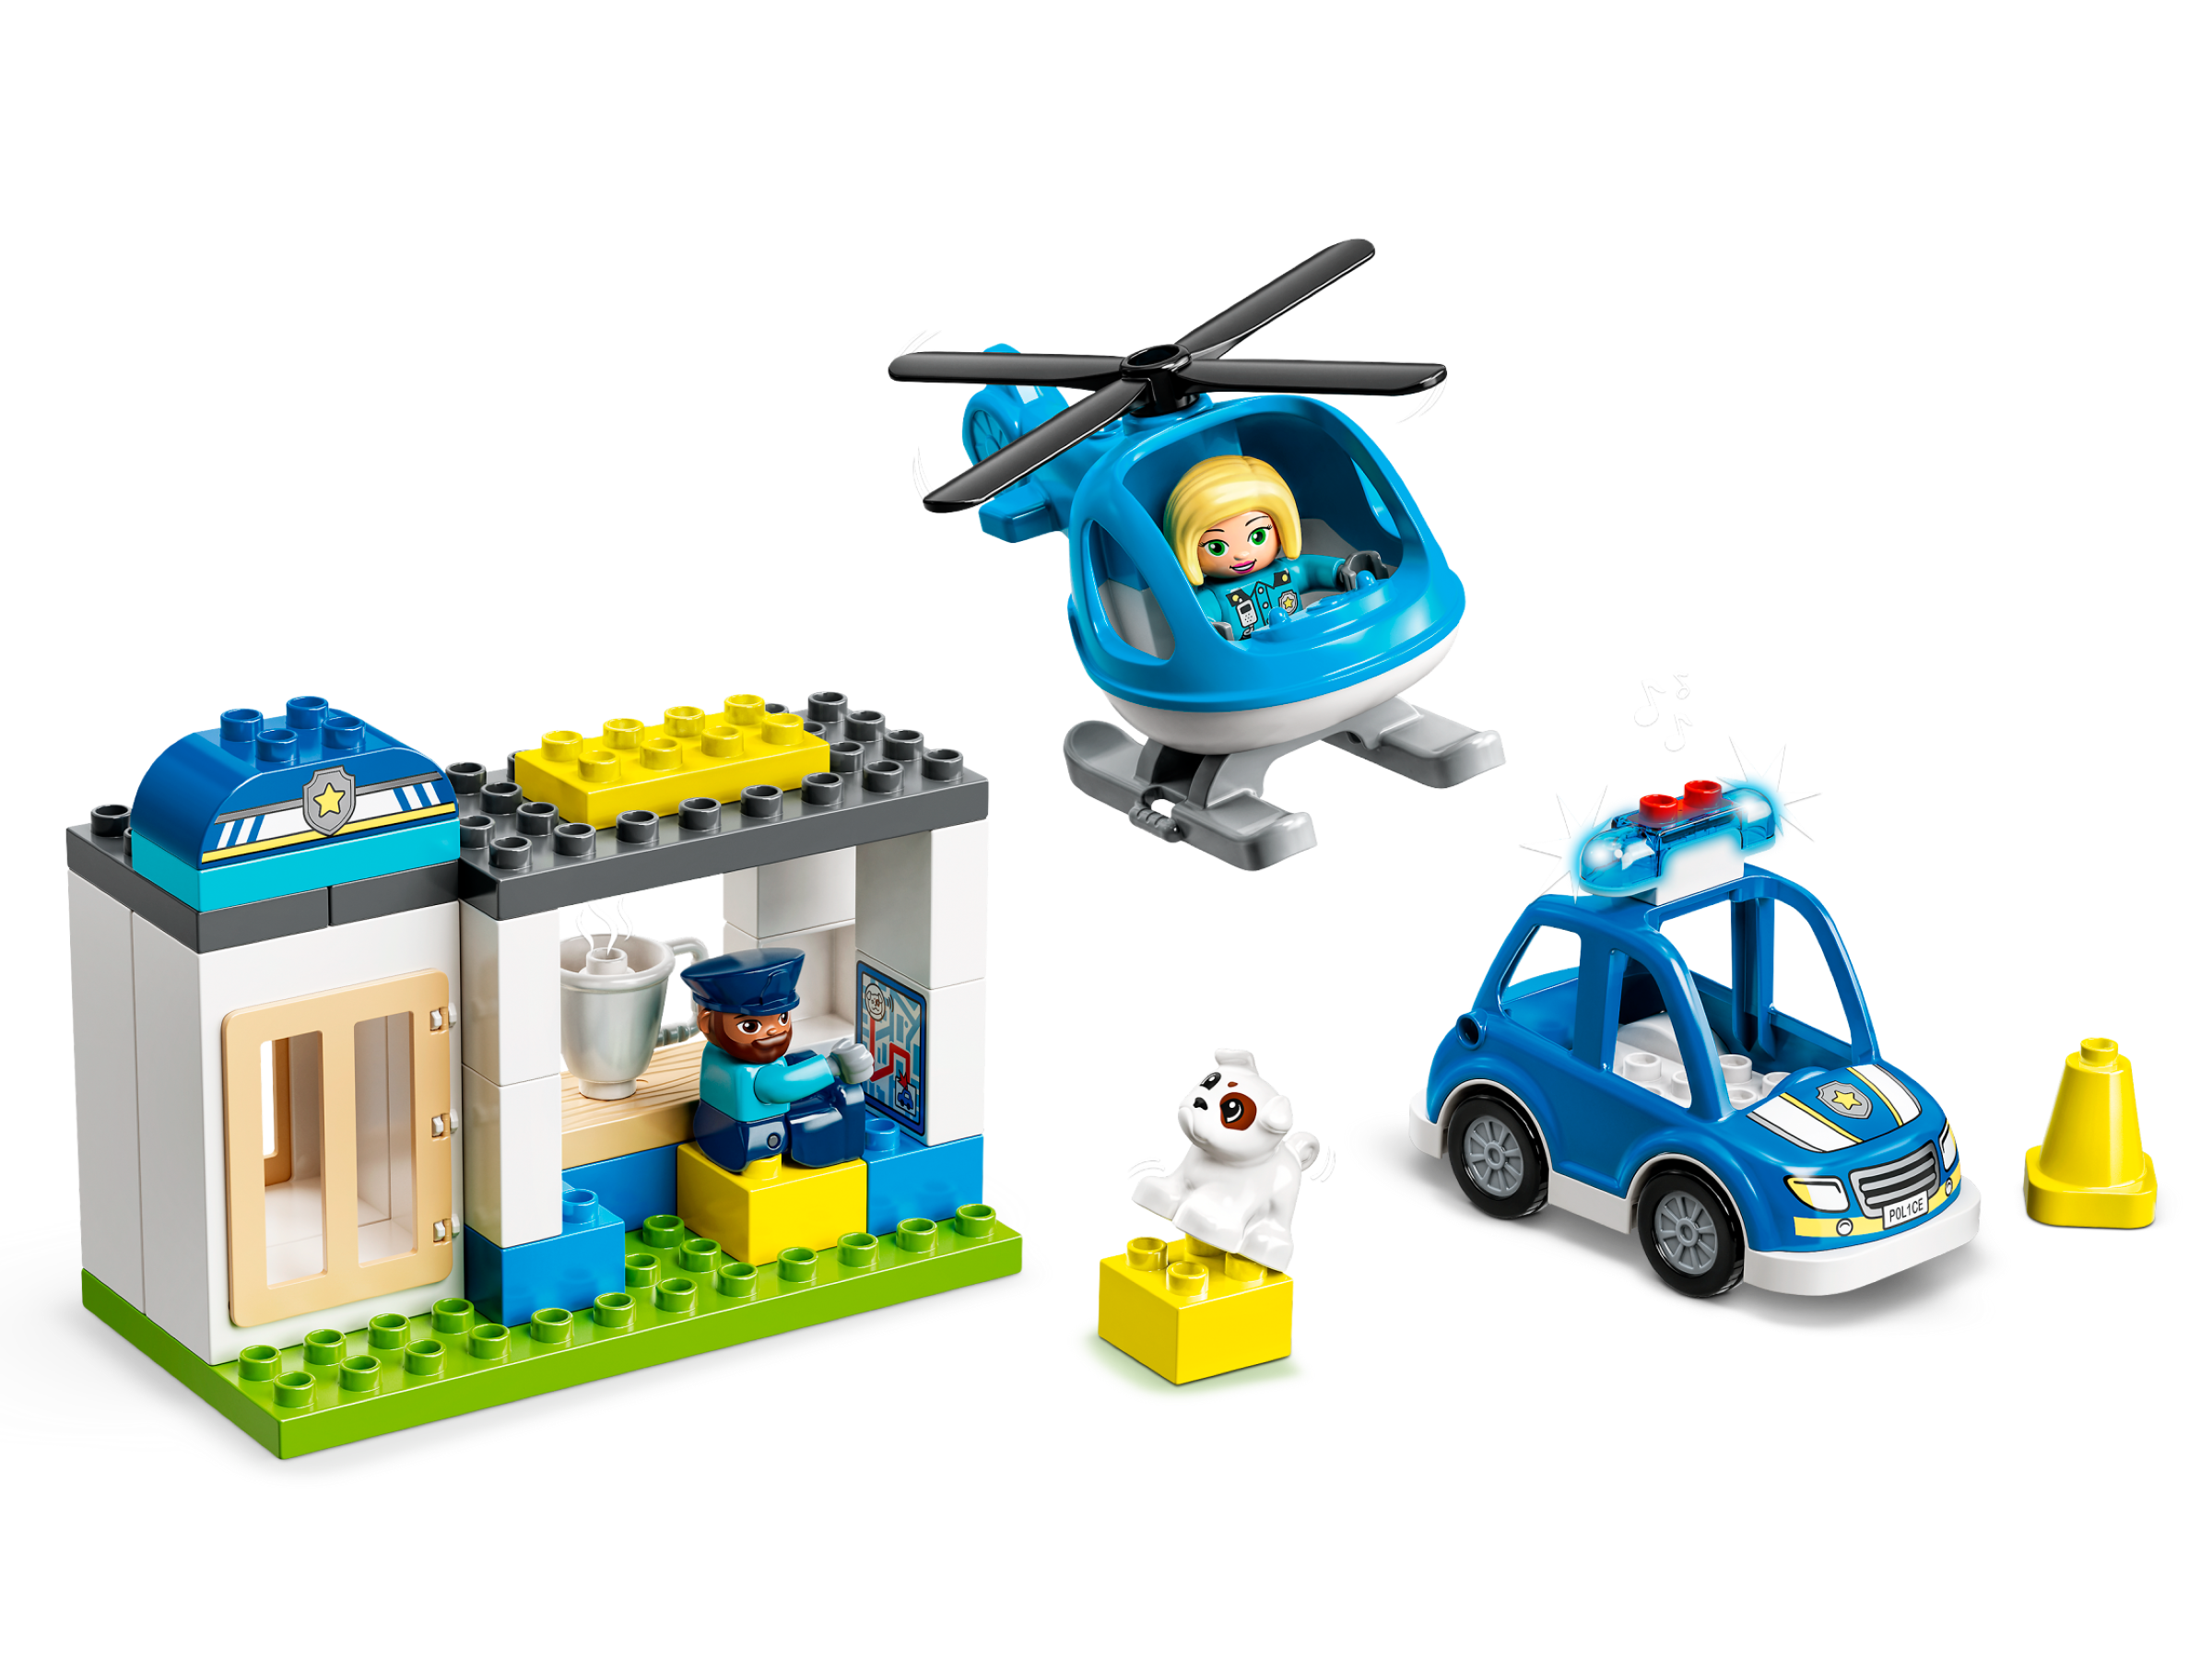 hoofdstuk Grote waanidee Savant Gifts & Toys for 1.5+ Year Olds | Toddlers 18 Months - 3 Years | Official  LEGO® Shop US